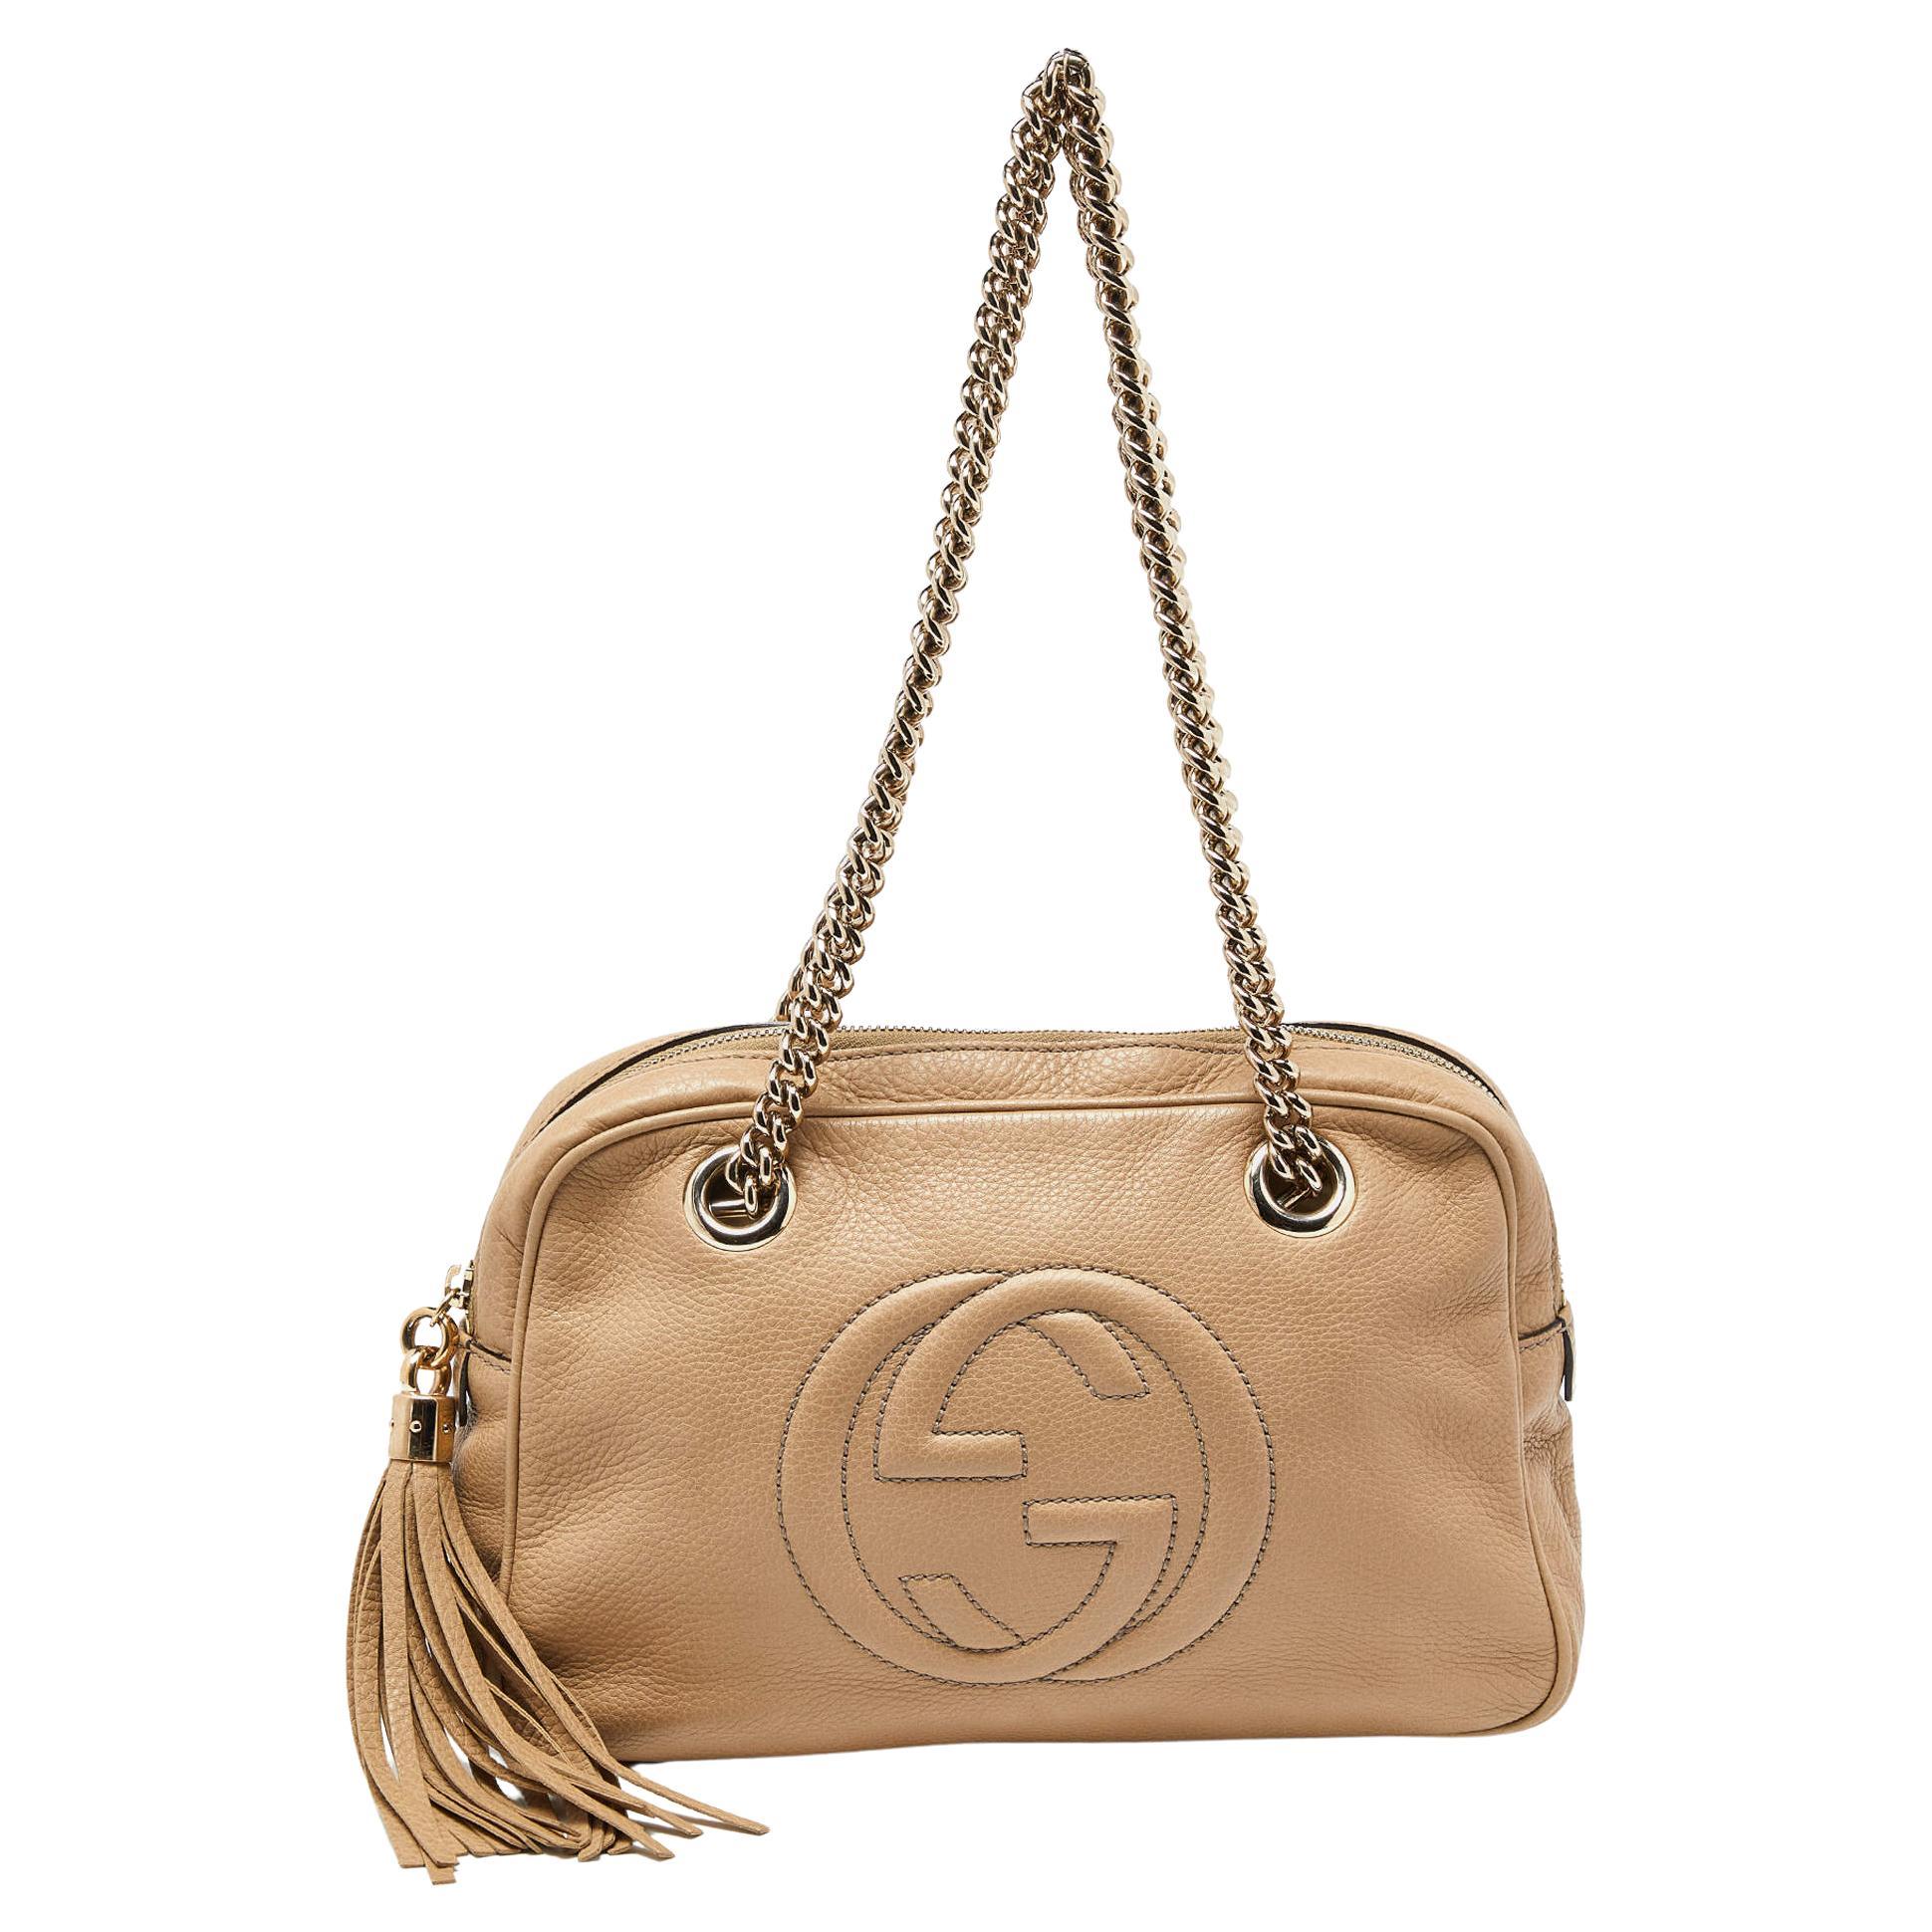 When did the Gucci Soho bag come out?